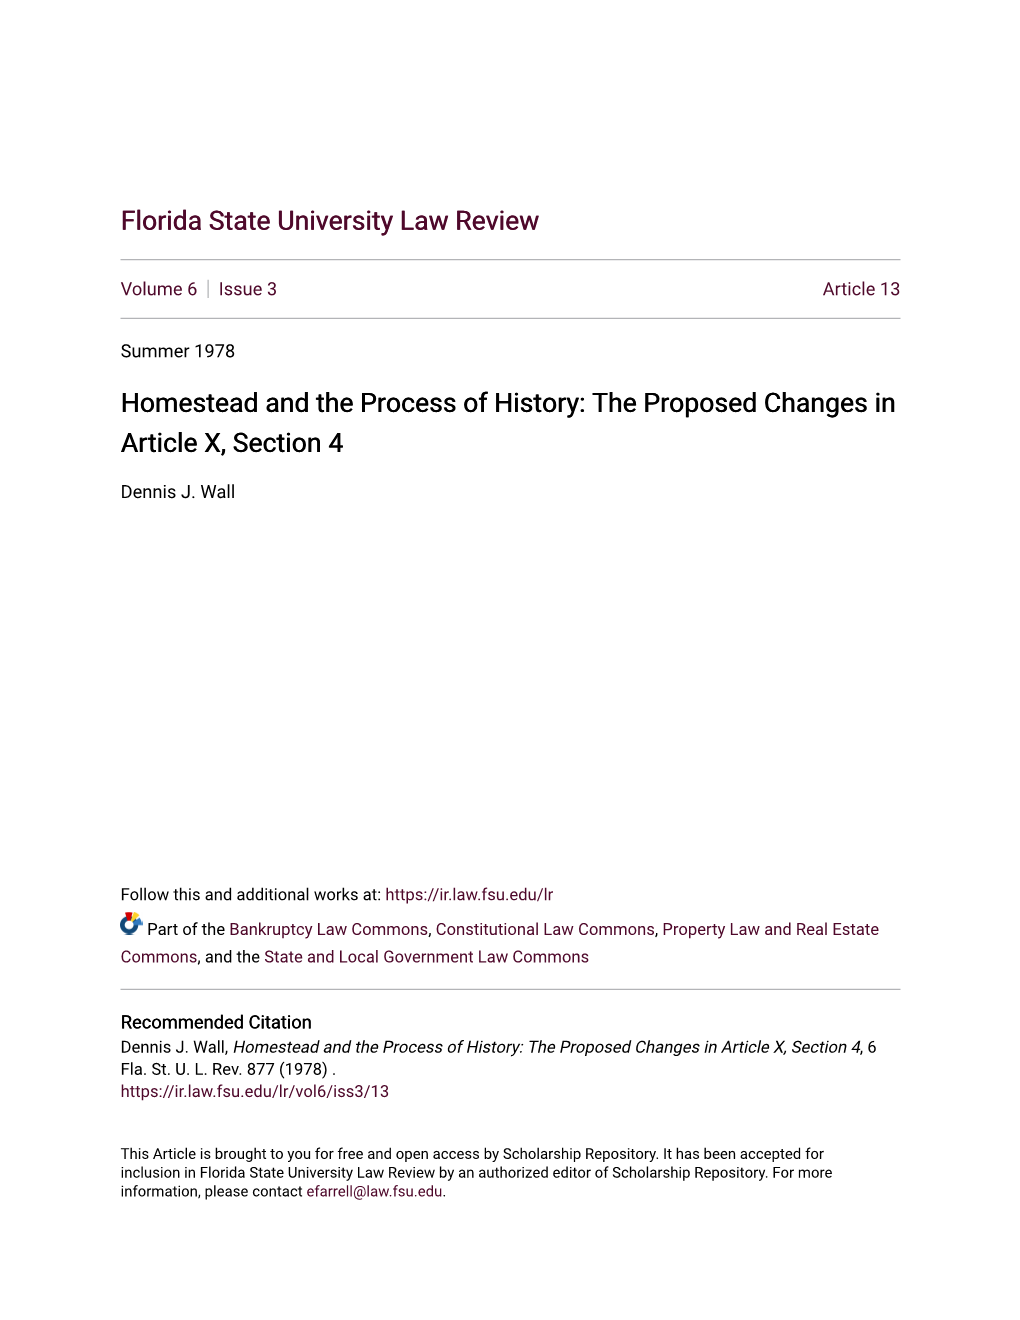 Homestead and the Process of History: the Proposed Changes in Article X, Section 4